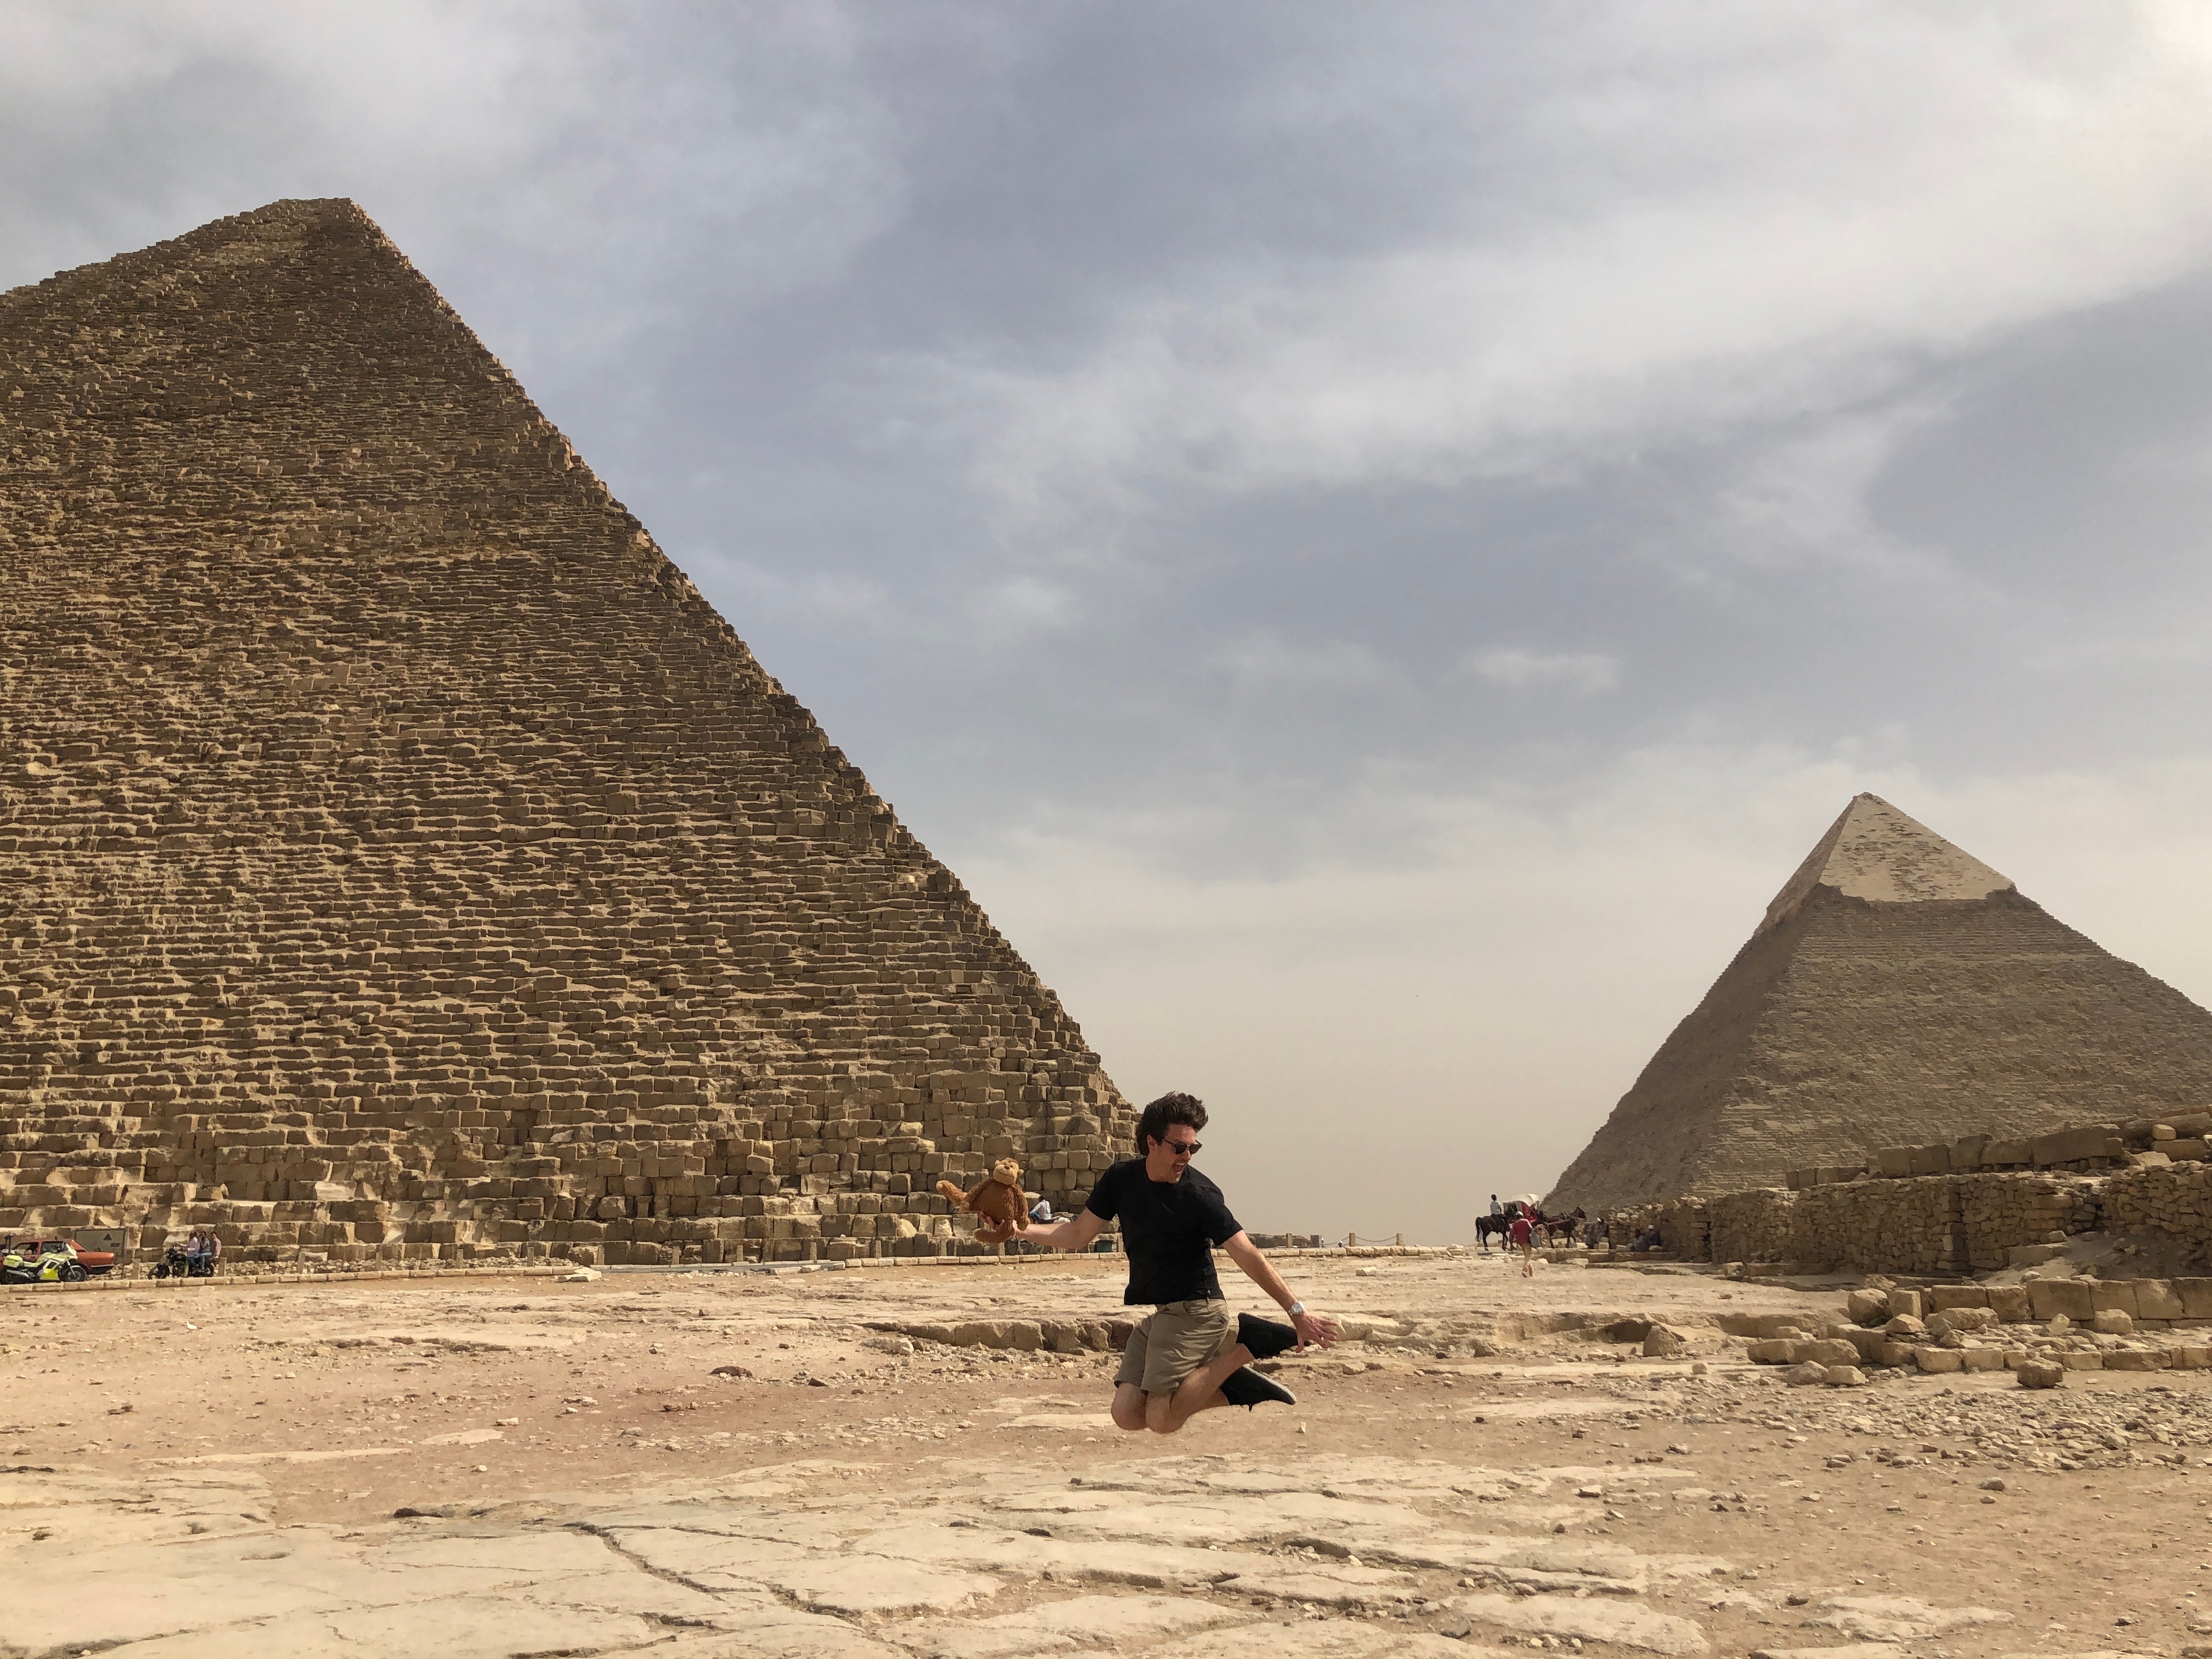 a man jumping in the sand with pyramids in the background